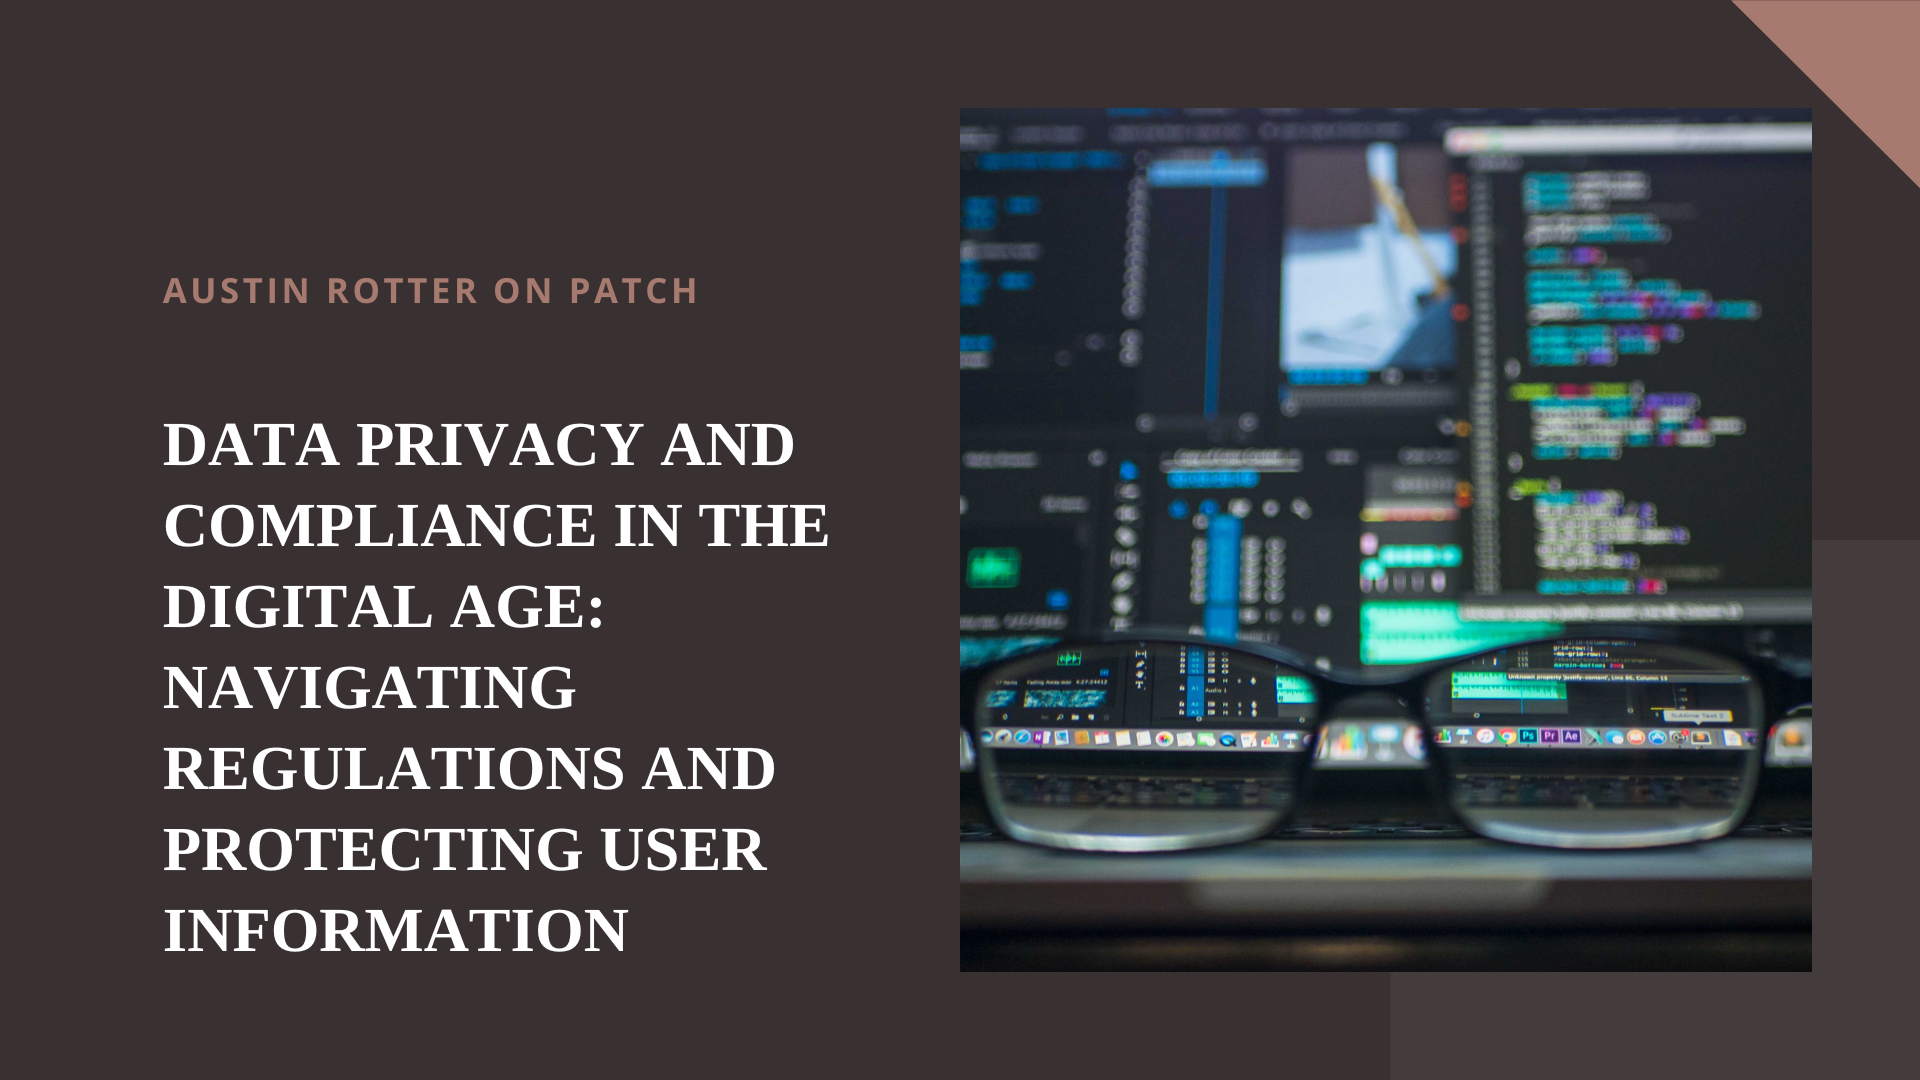 AUSTIN ROTTER ON PATCH

DATA PRIVACY AND
COMPLIANCE IN THE
DIGITAL AGE:
NAVIGATING
REGULATIONS AND
PROTECTING USER
INFORMATION